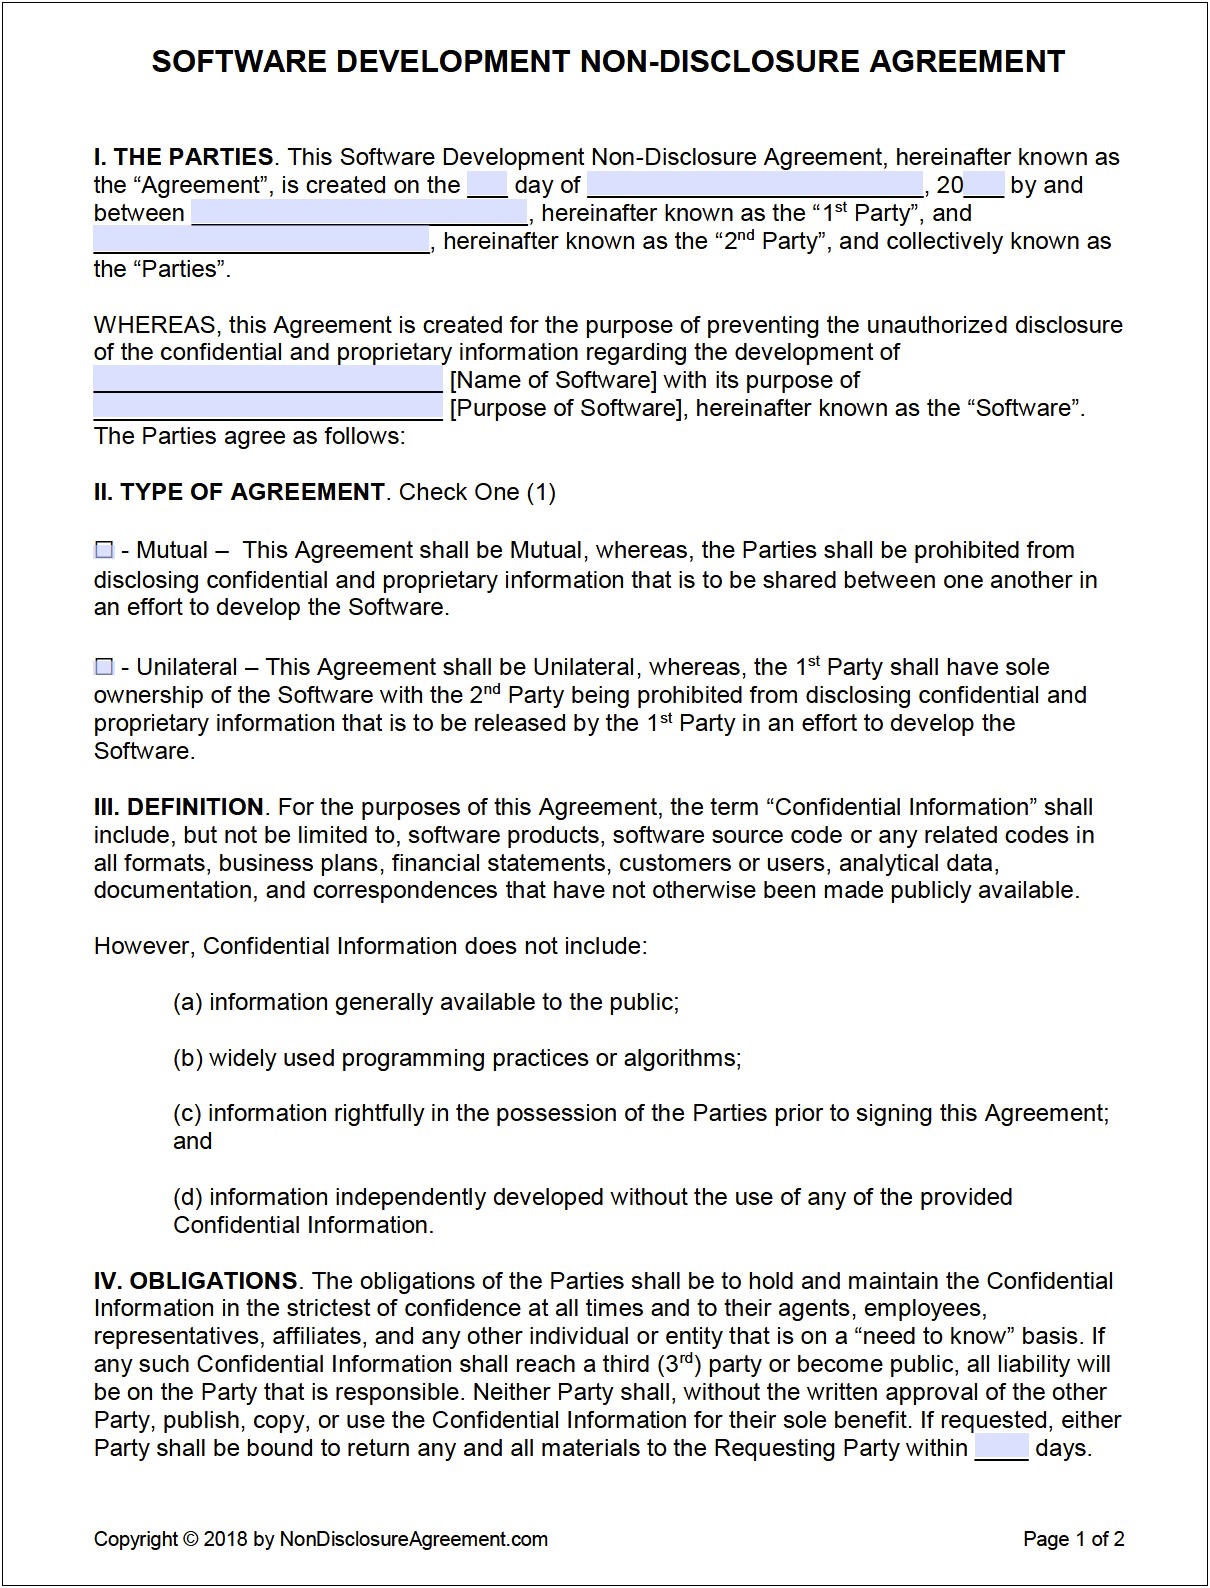 Free Non Disclosure Agreement Template South Africa